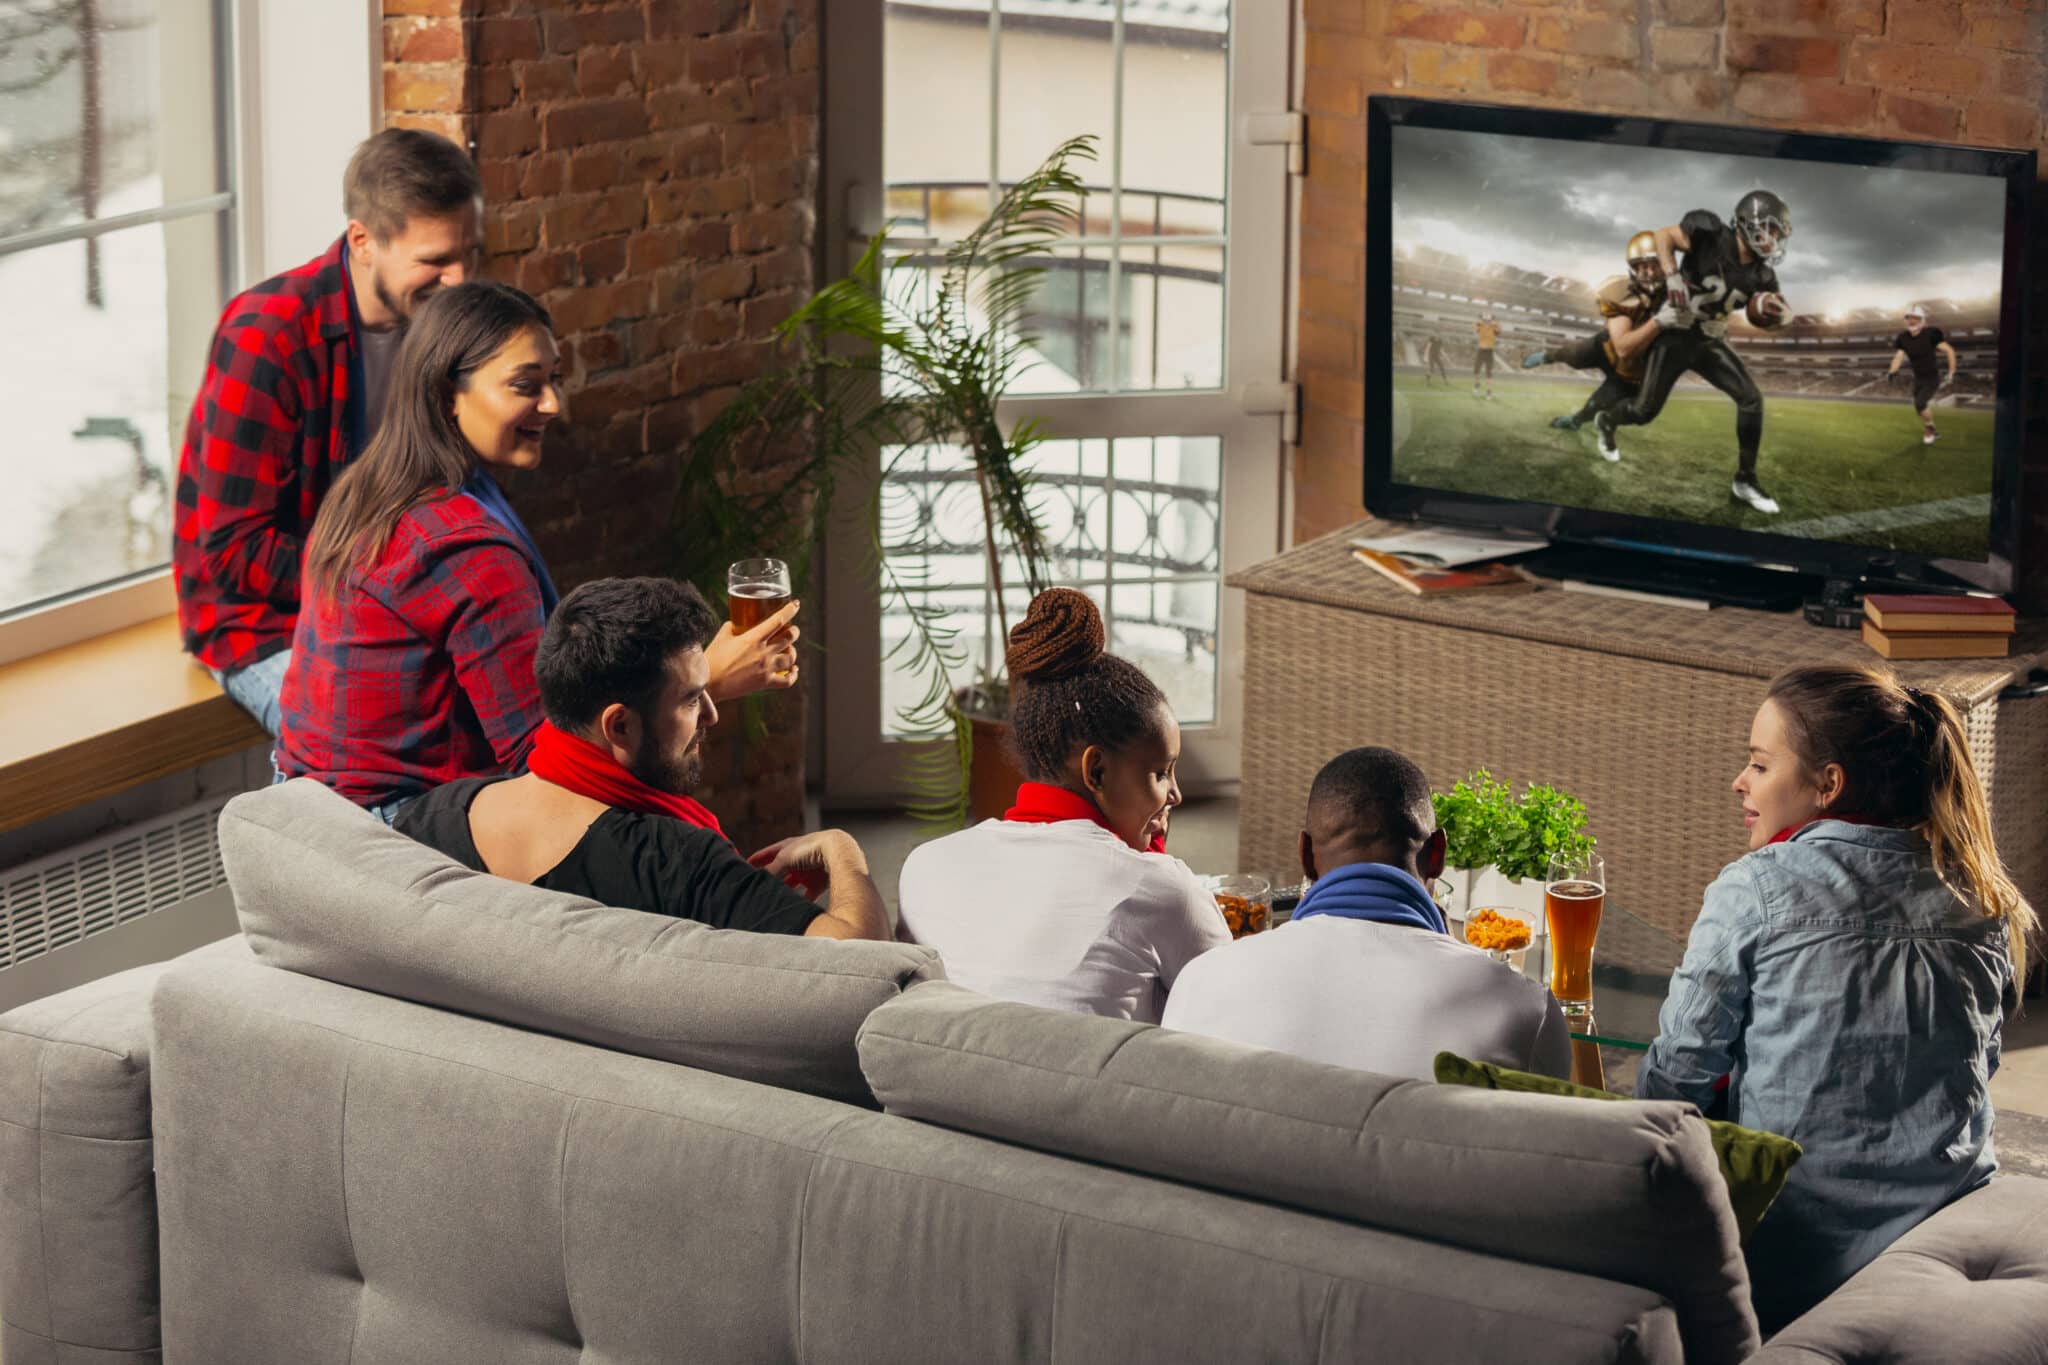 I Don't Have Cable, So Where Can I Watch NFL Games?